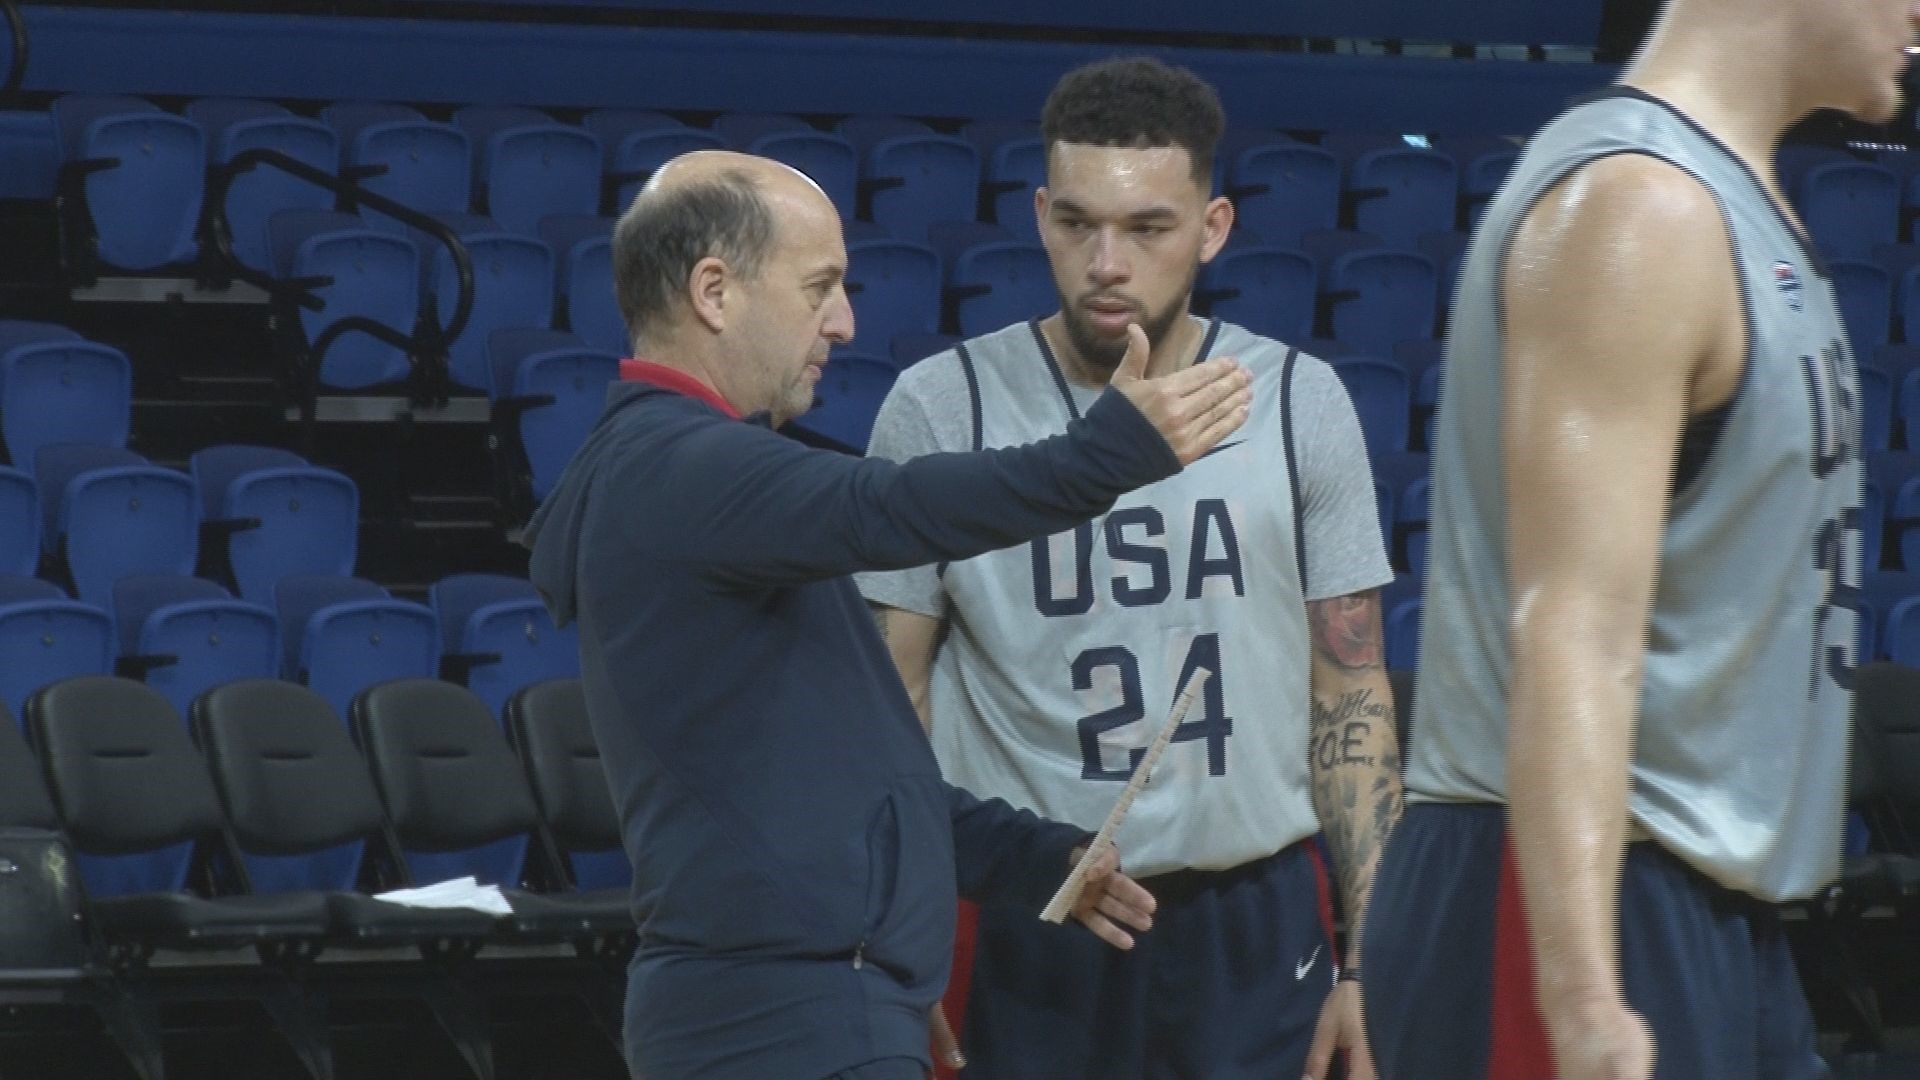 Coach Jeff Van Gundy and USA Basketball are set to host FIBA World Cup Qualifiers at the Greensboro Coliseum Fieldhouse this week. Team USA hosts Panama Friday at 7 p.m. and Argentina on Monday.